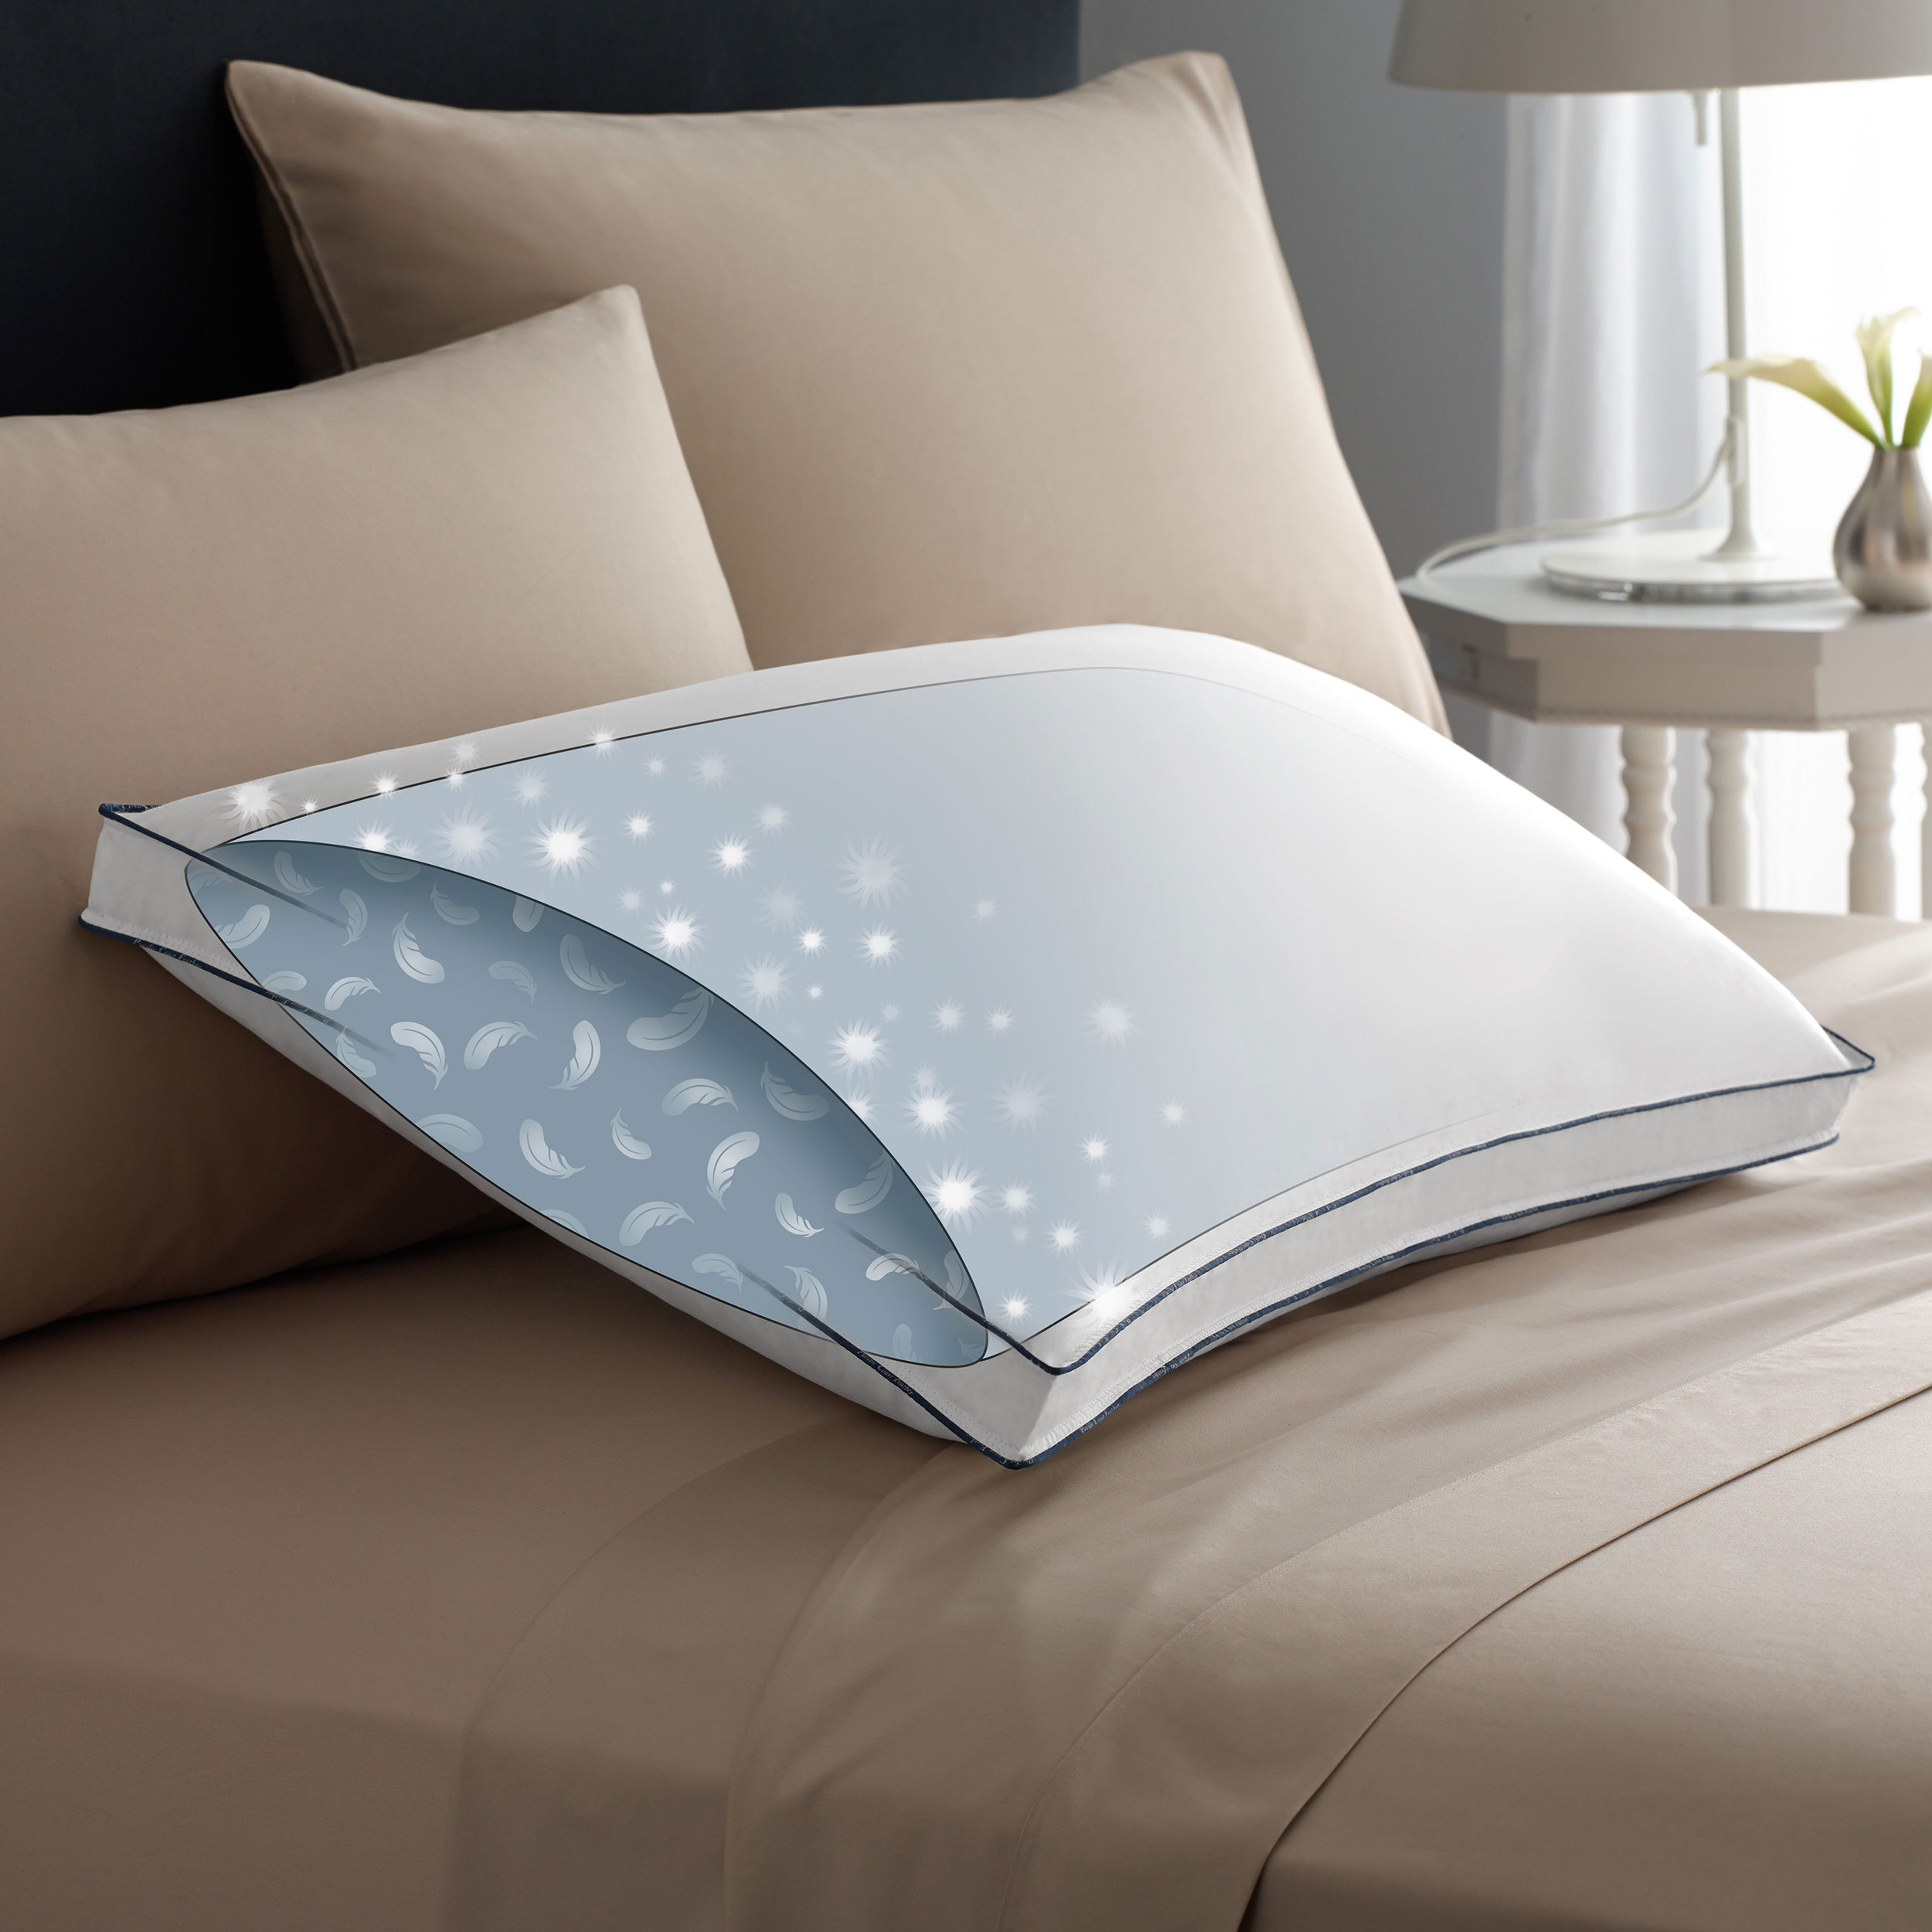 Pacific Coast® Online Bedding Stores Pillows